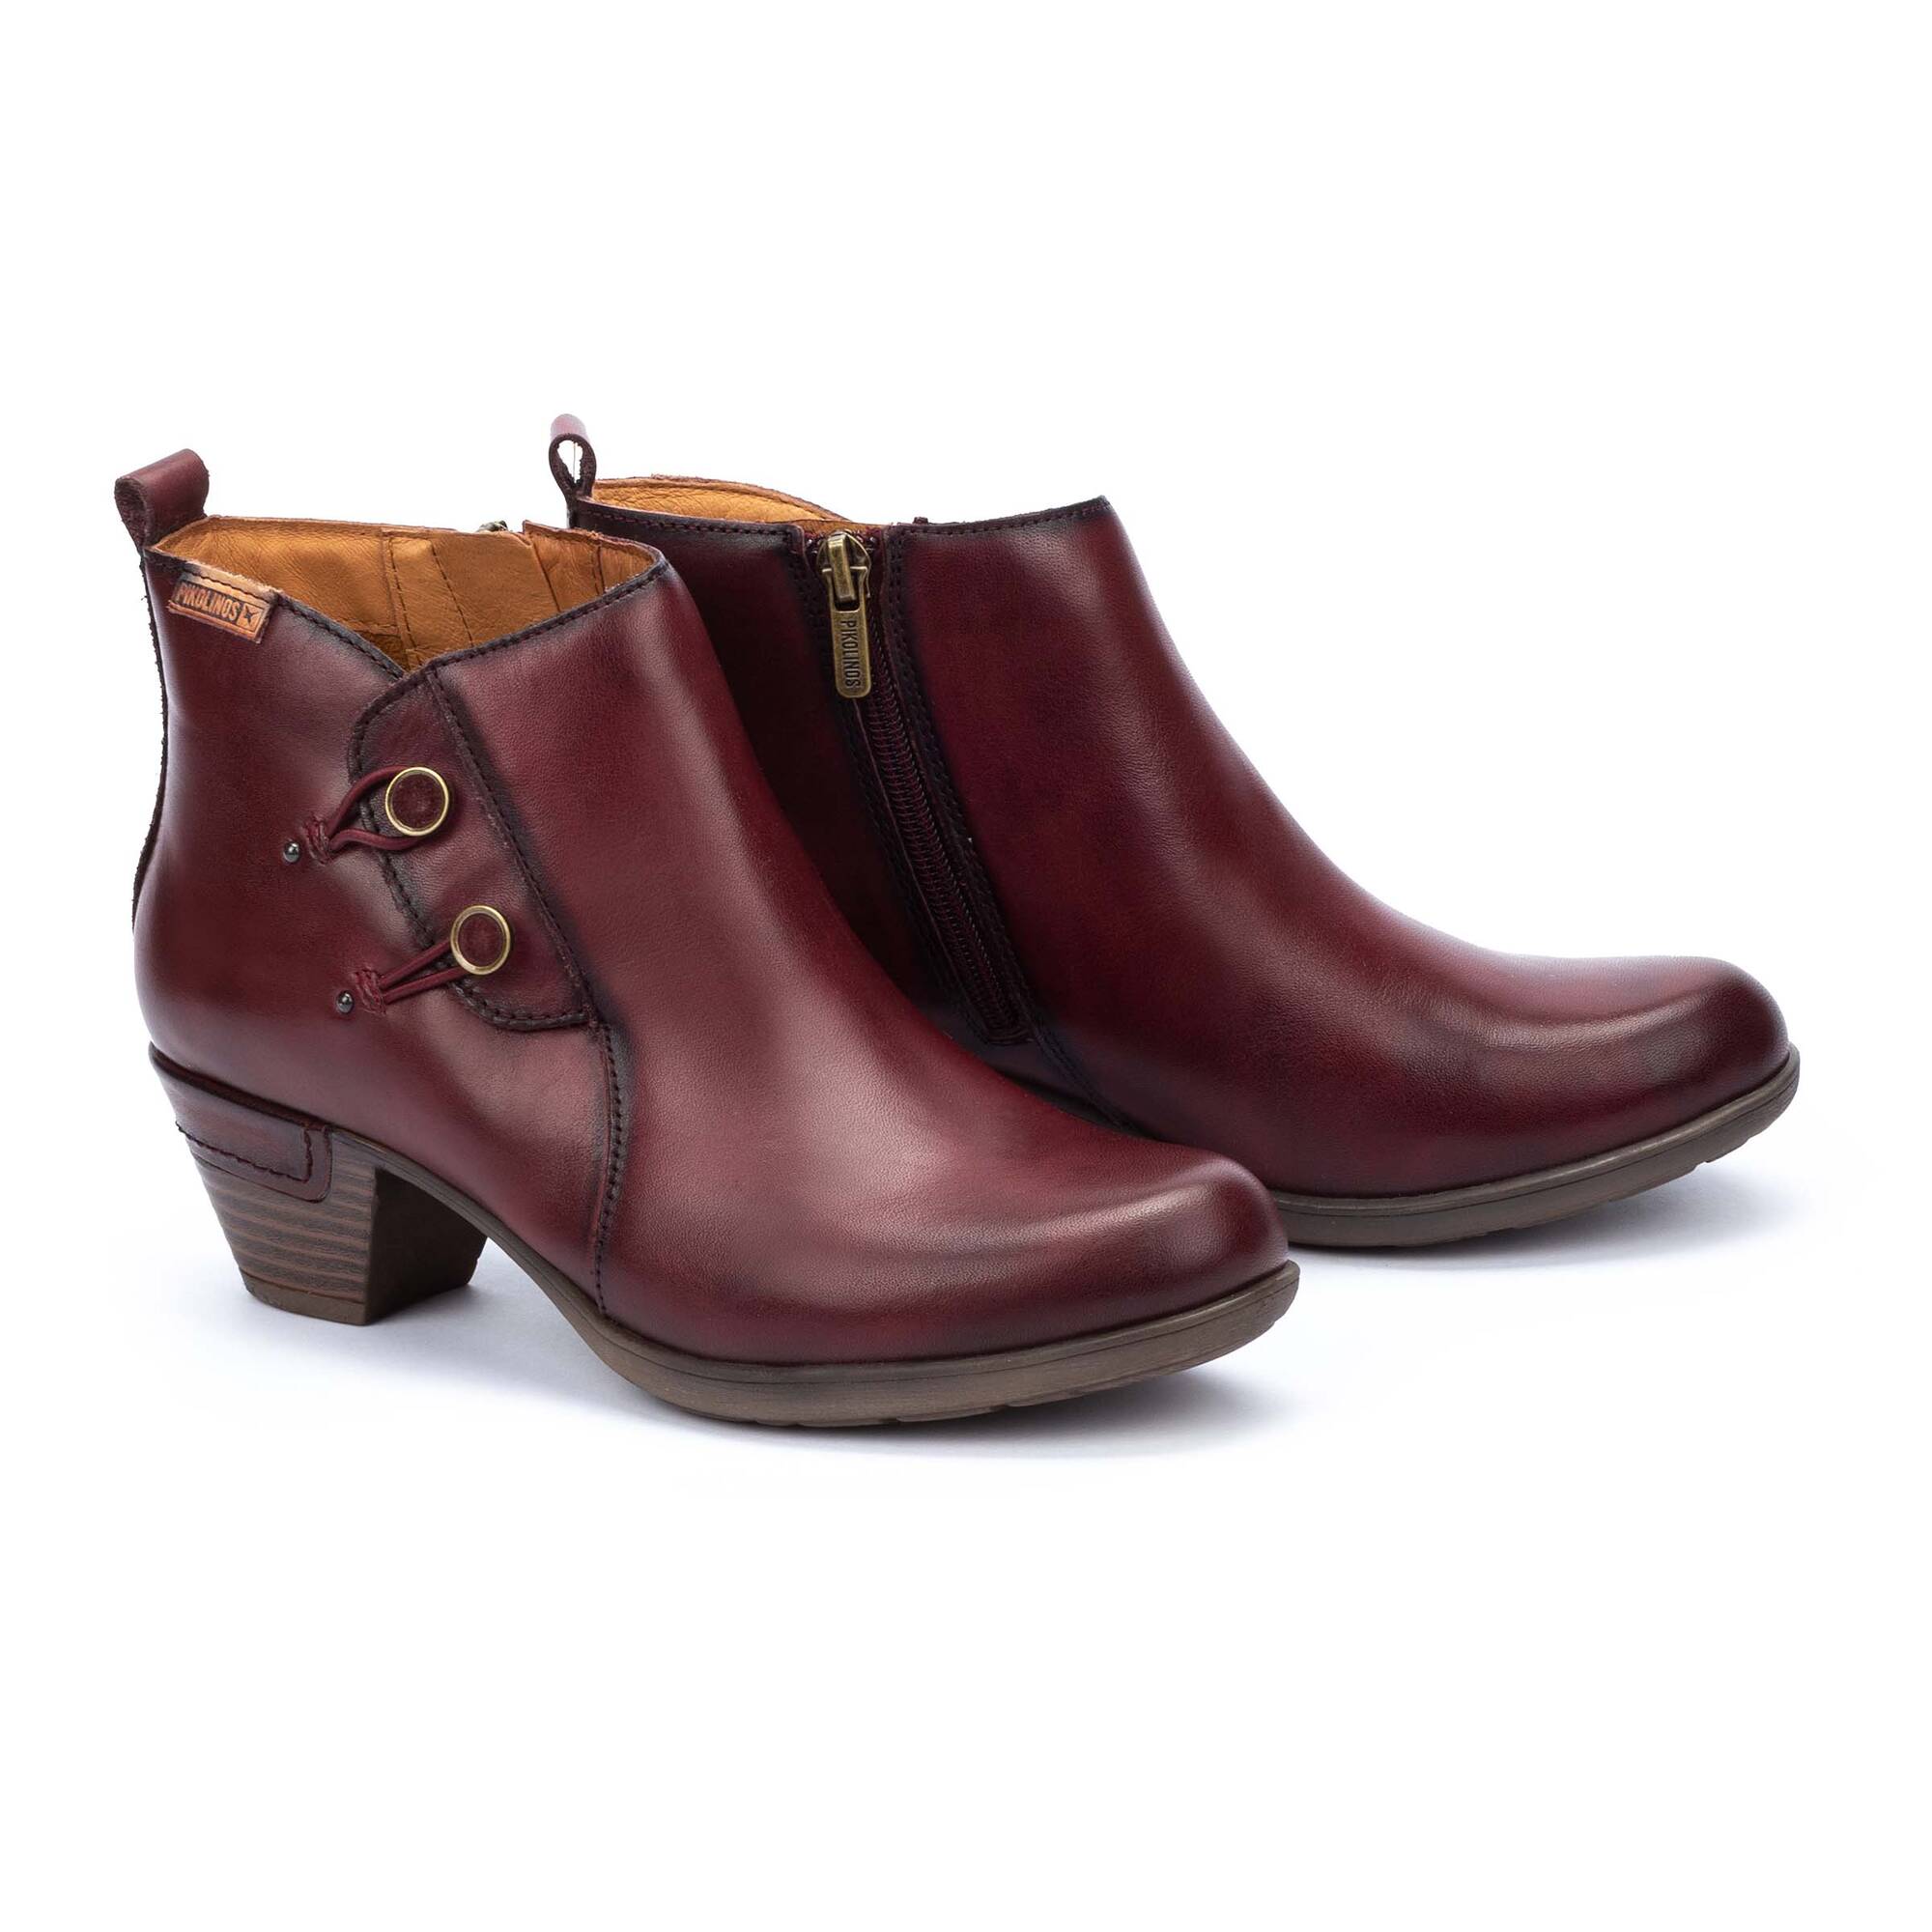 Ankle boots | ROTTERDAM 902-8947, GARNET, large image number 100 | null